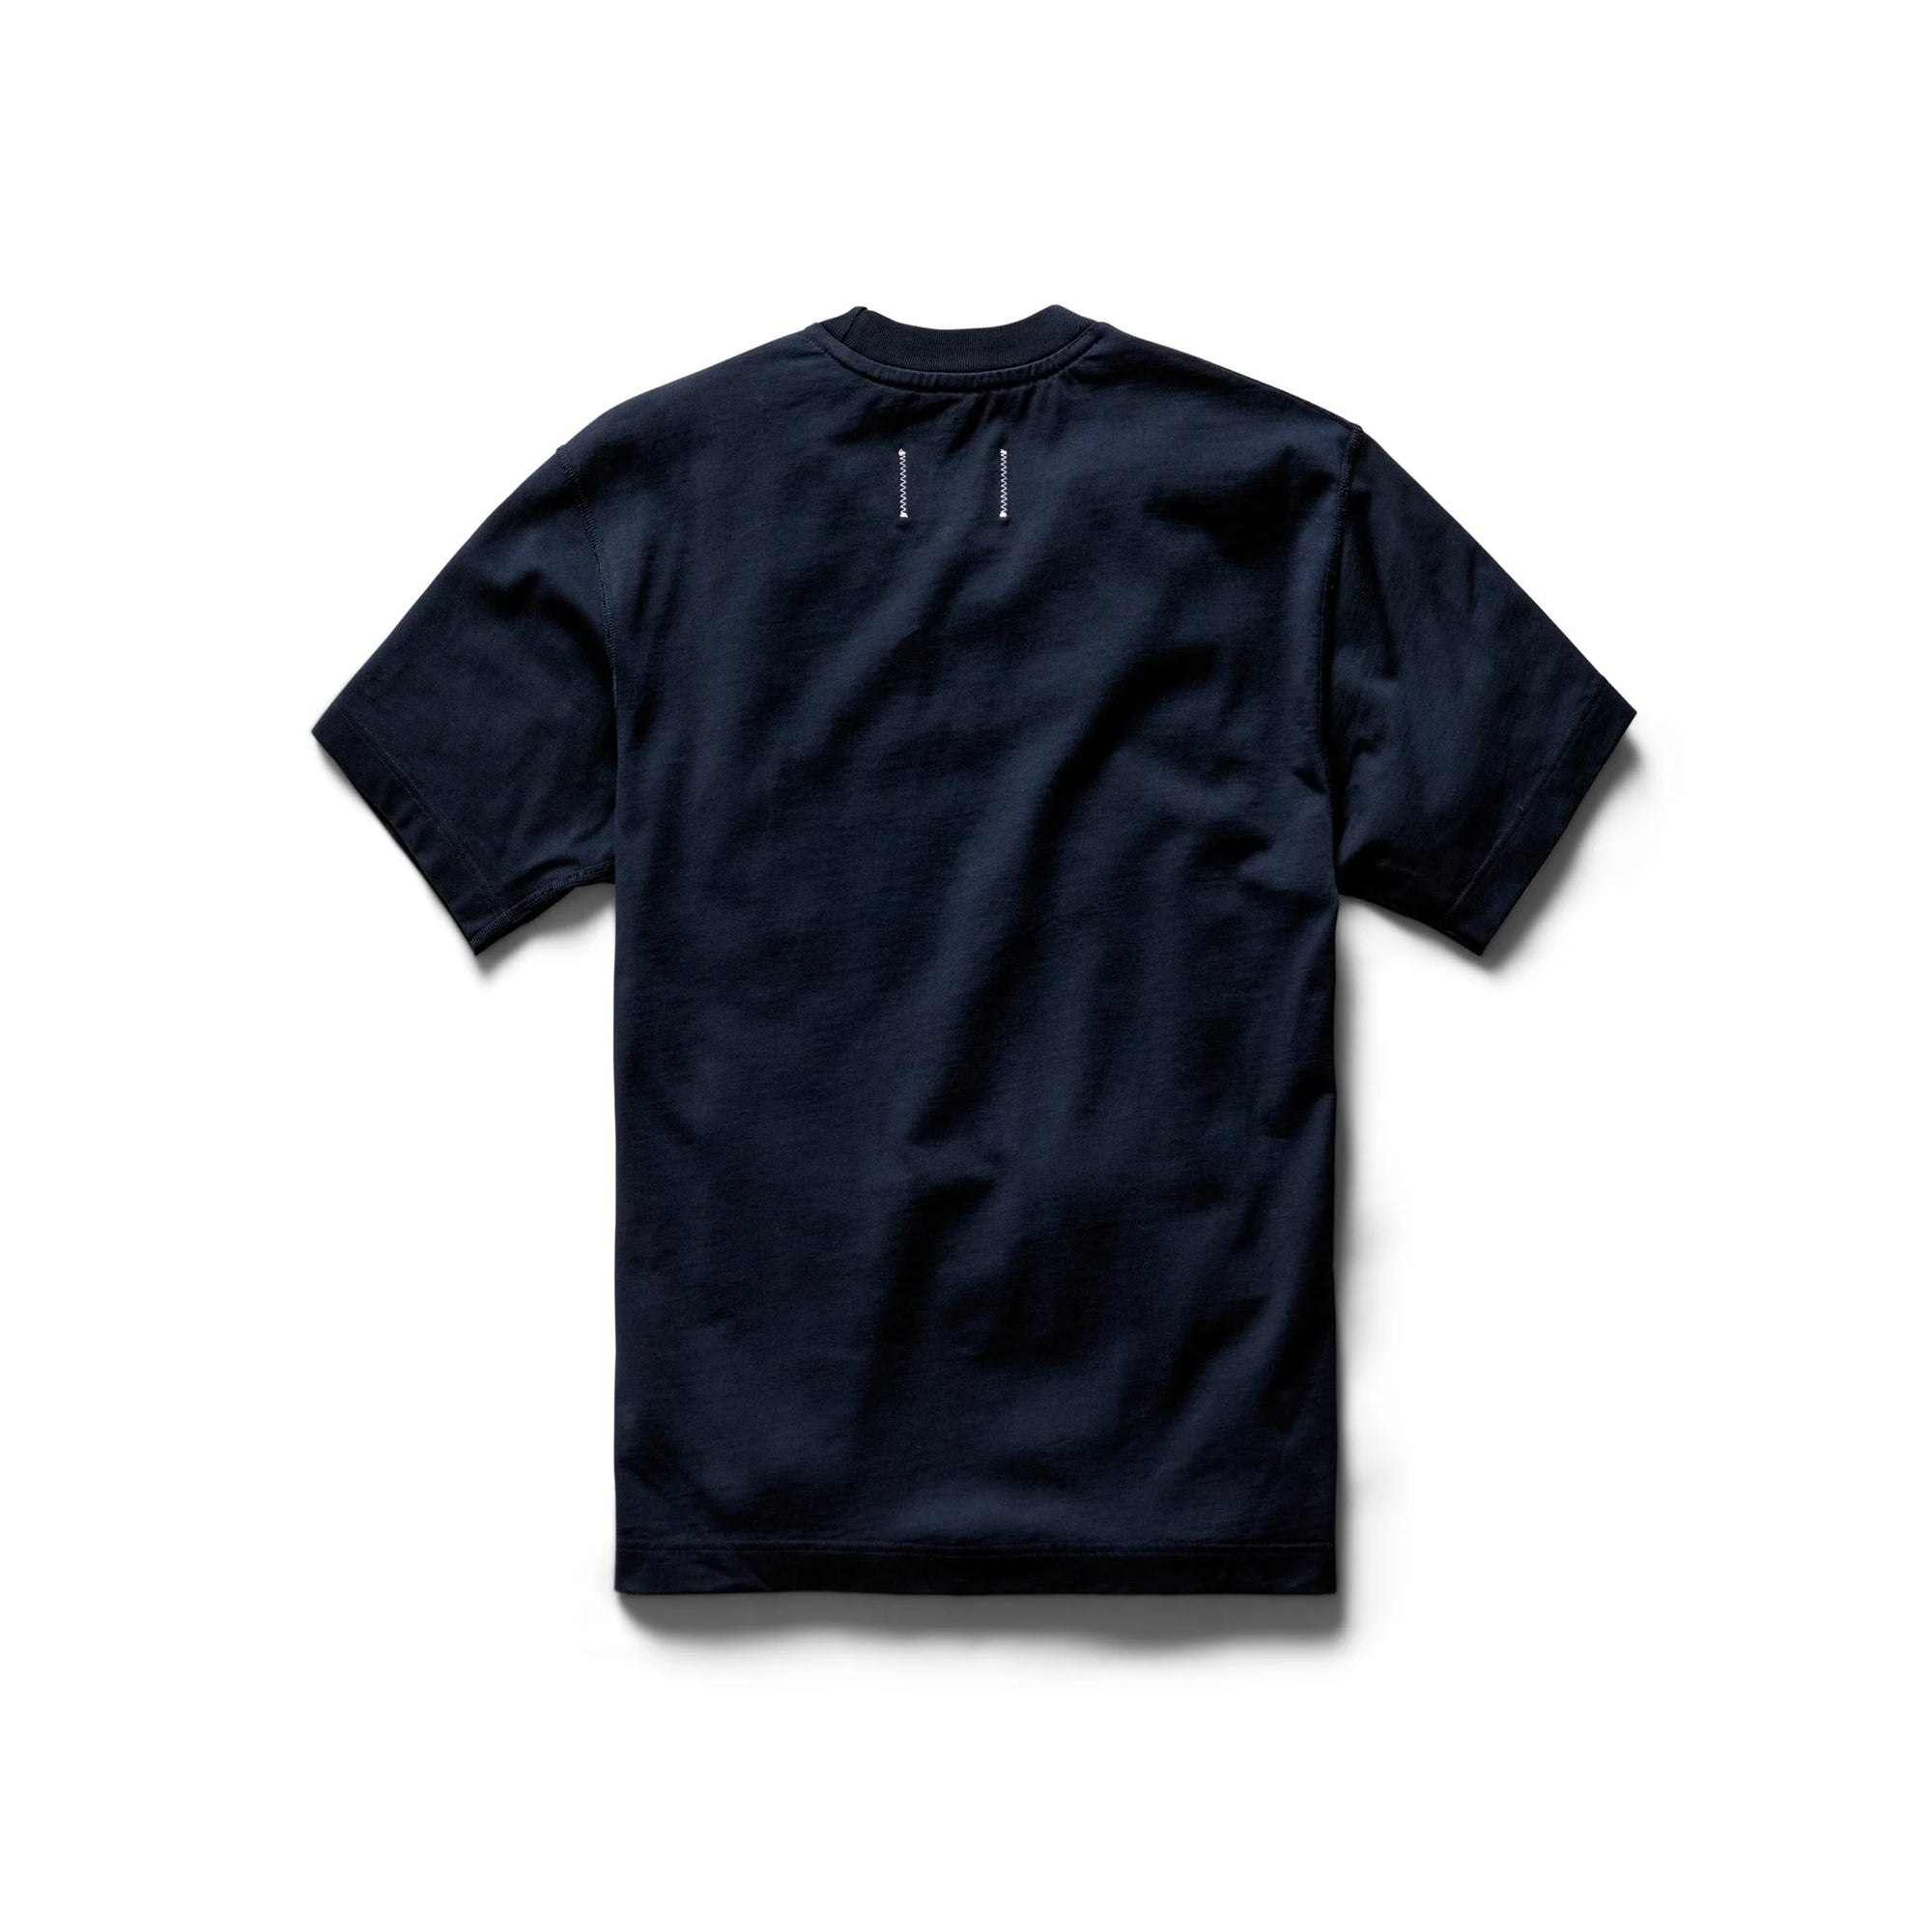 Reigning Champ Mid Weight Jersey T-Shirt in Navy